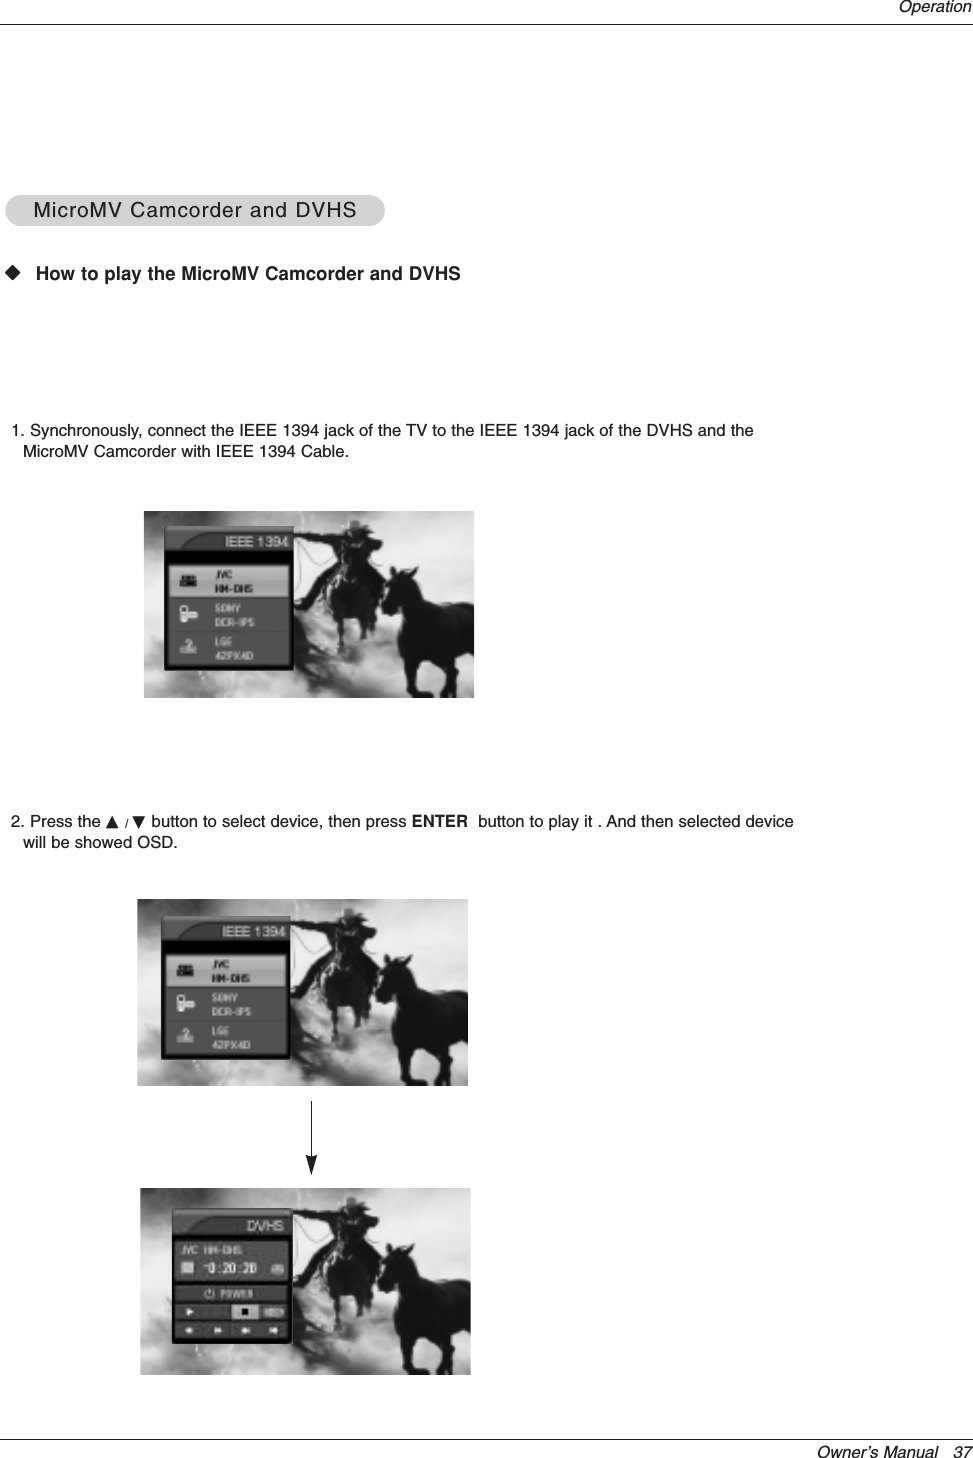 Owner’s Manual   37OperationWWHow to play the MicroMV Camcorder and DVHSMicroMV Camcorder and DVHSMicroMV Camcorder and DVHS1. Synchronously, connect the IEEE 1394 jack of the TV to the IEEE 1394 jack of the DVHS and theMicroMV Camcorder with IEEE 1394 Cable.2. Press the D/Ebutton to select device, then press ENTER button to play it . And then selected devicewill be showed OSD.